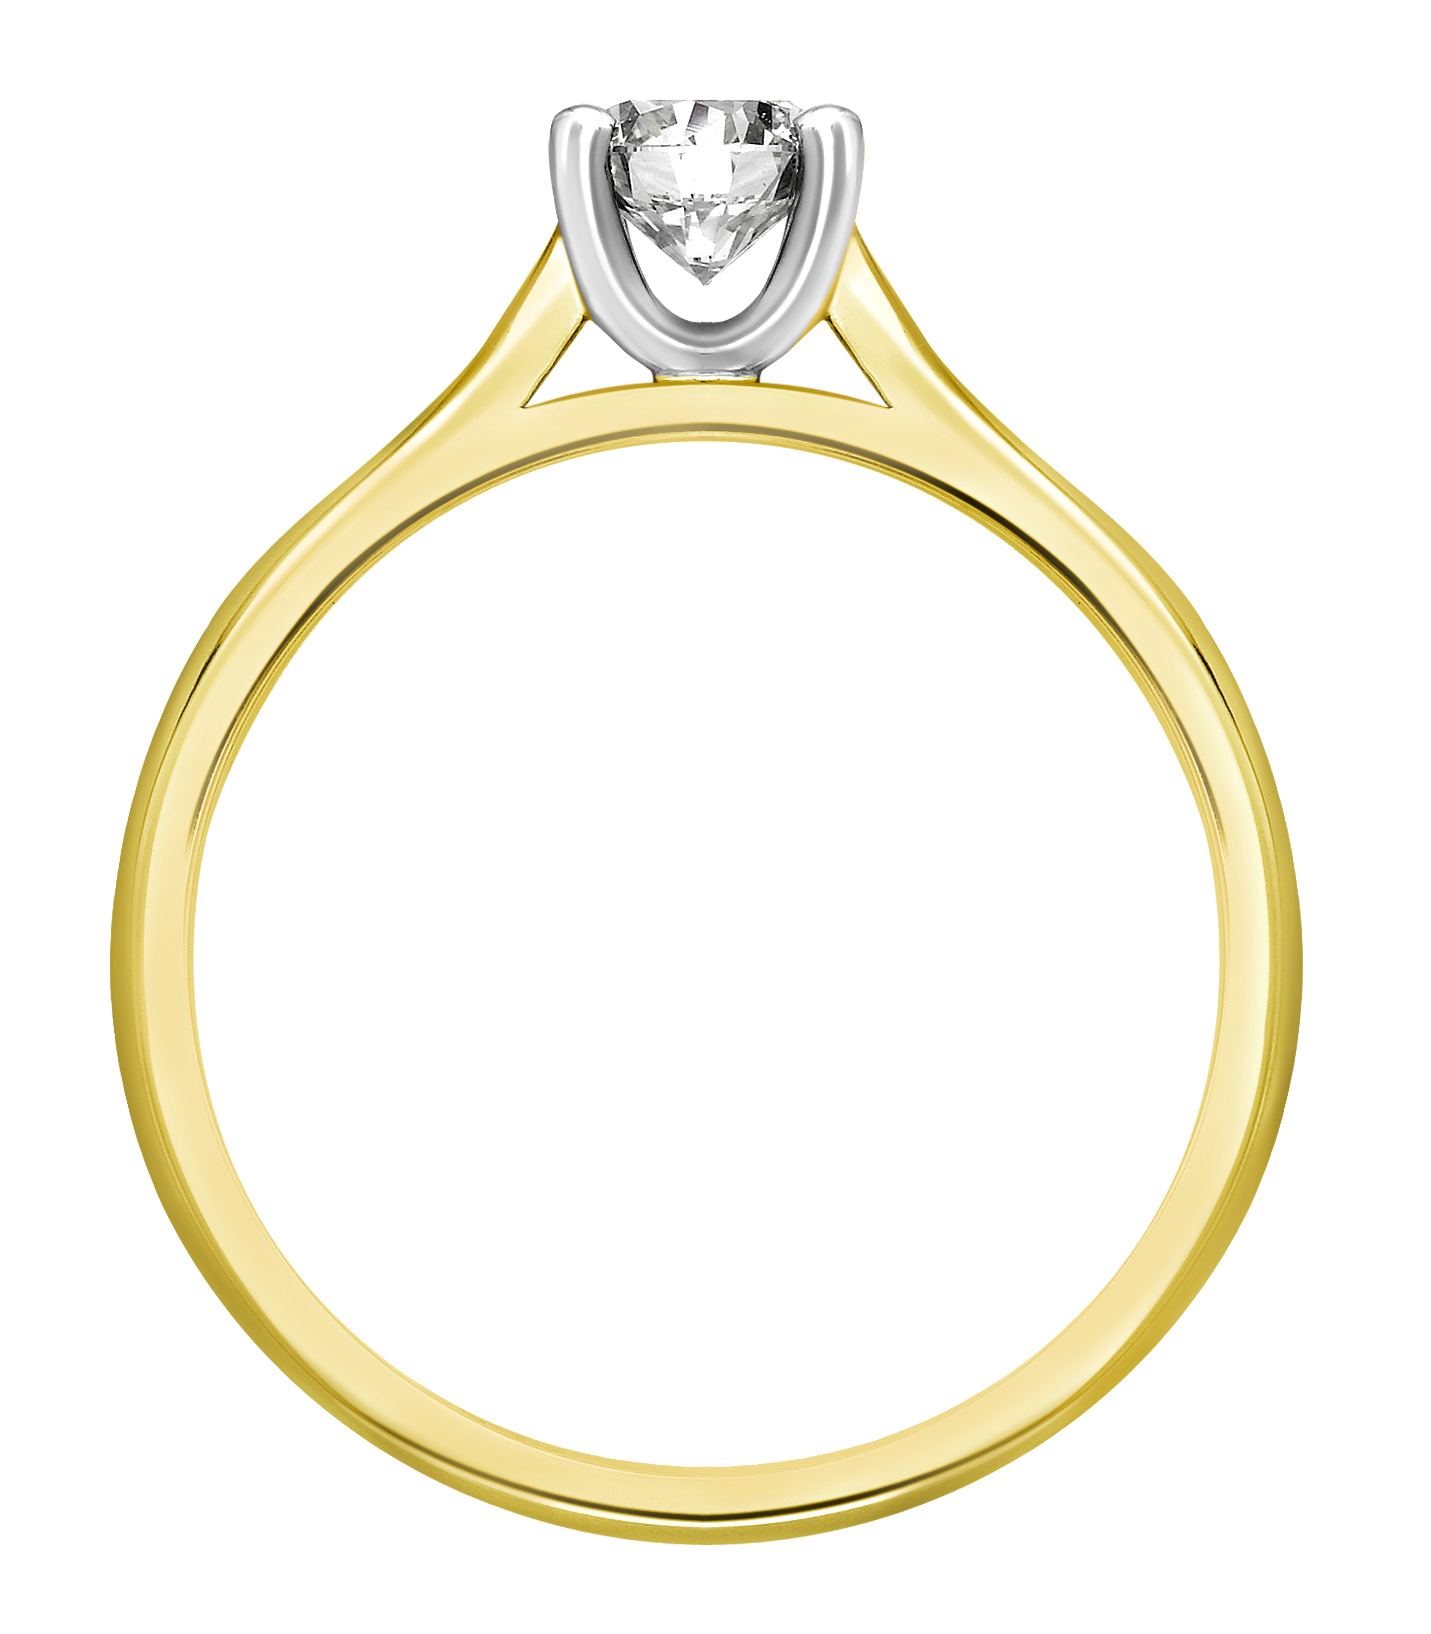 Round Four Claw Yellow Gold Engagement Ring GRC680YG Image 2